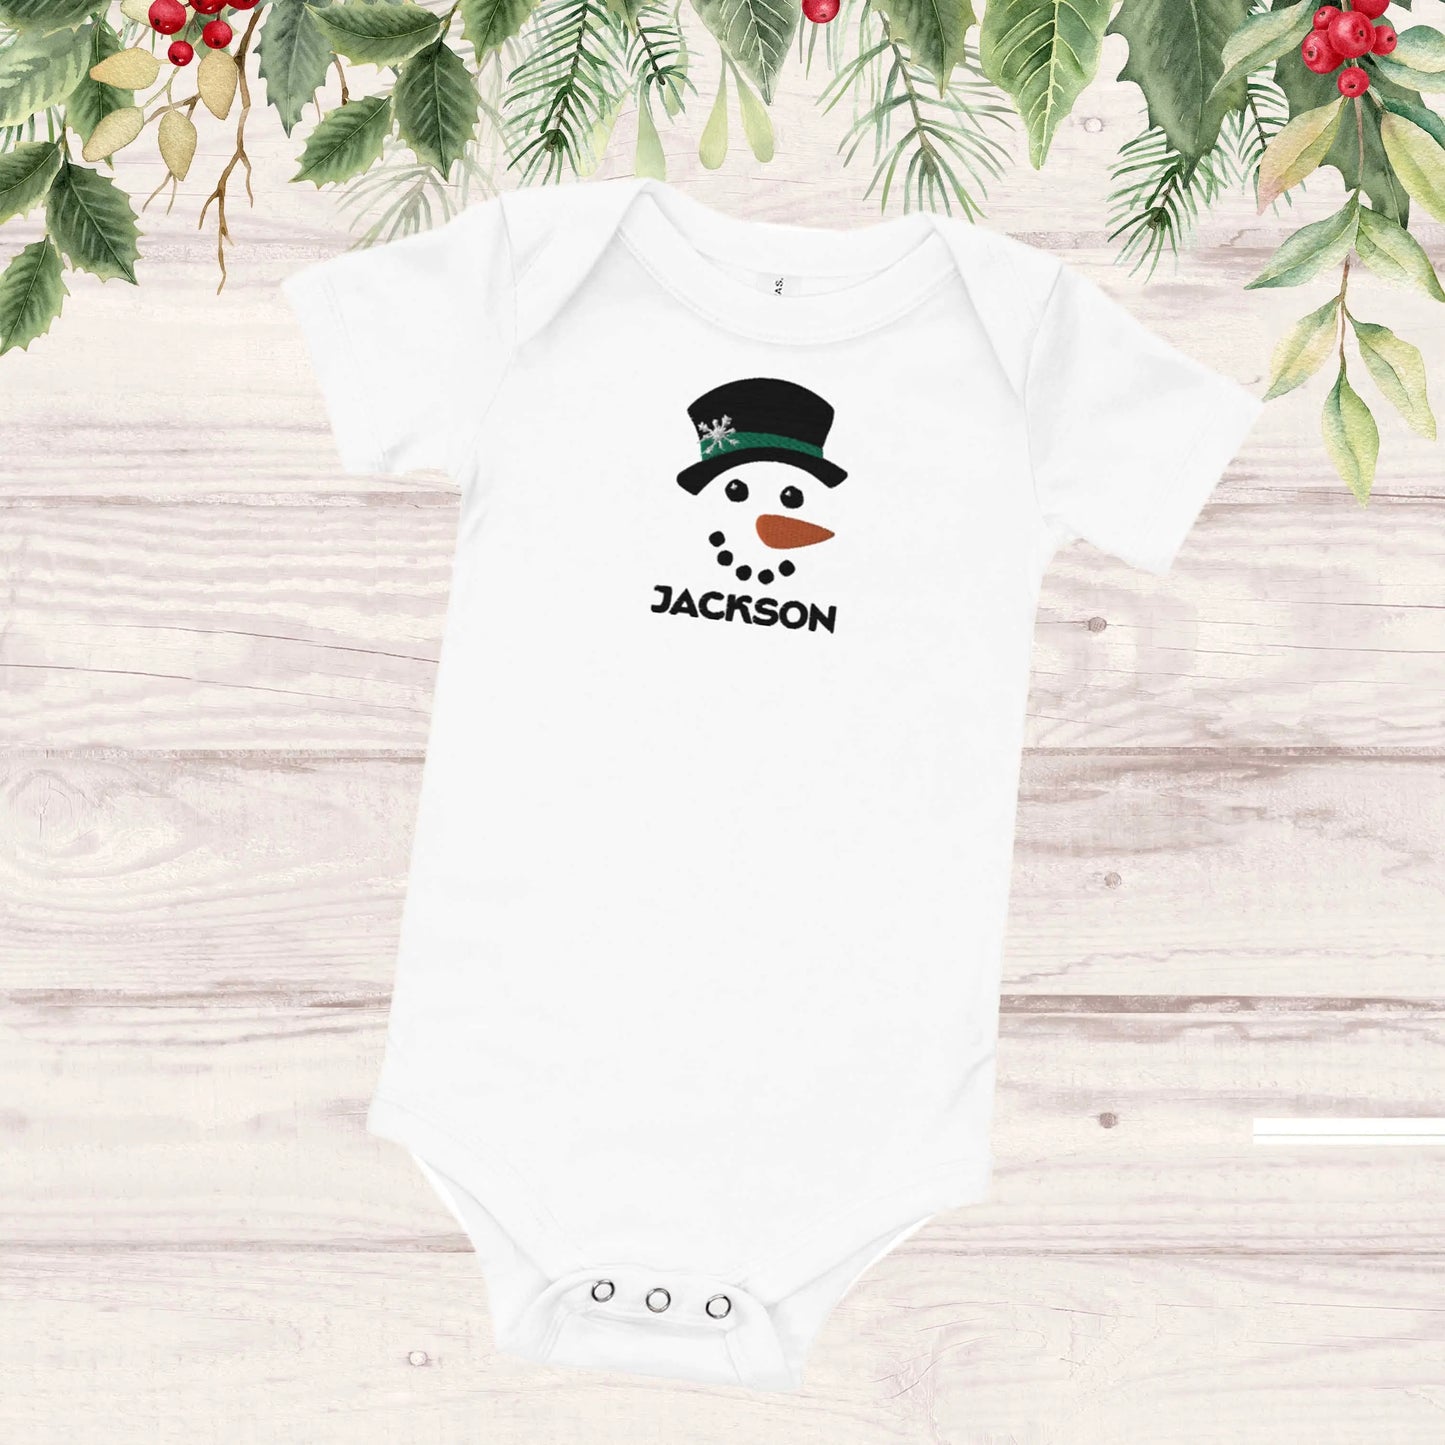 Snowman Boy Personalized Embroidered Baby Onesie, Custom Name Embroidery Amazing Faith Designs